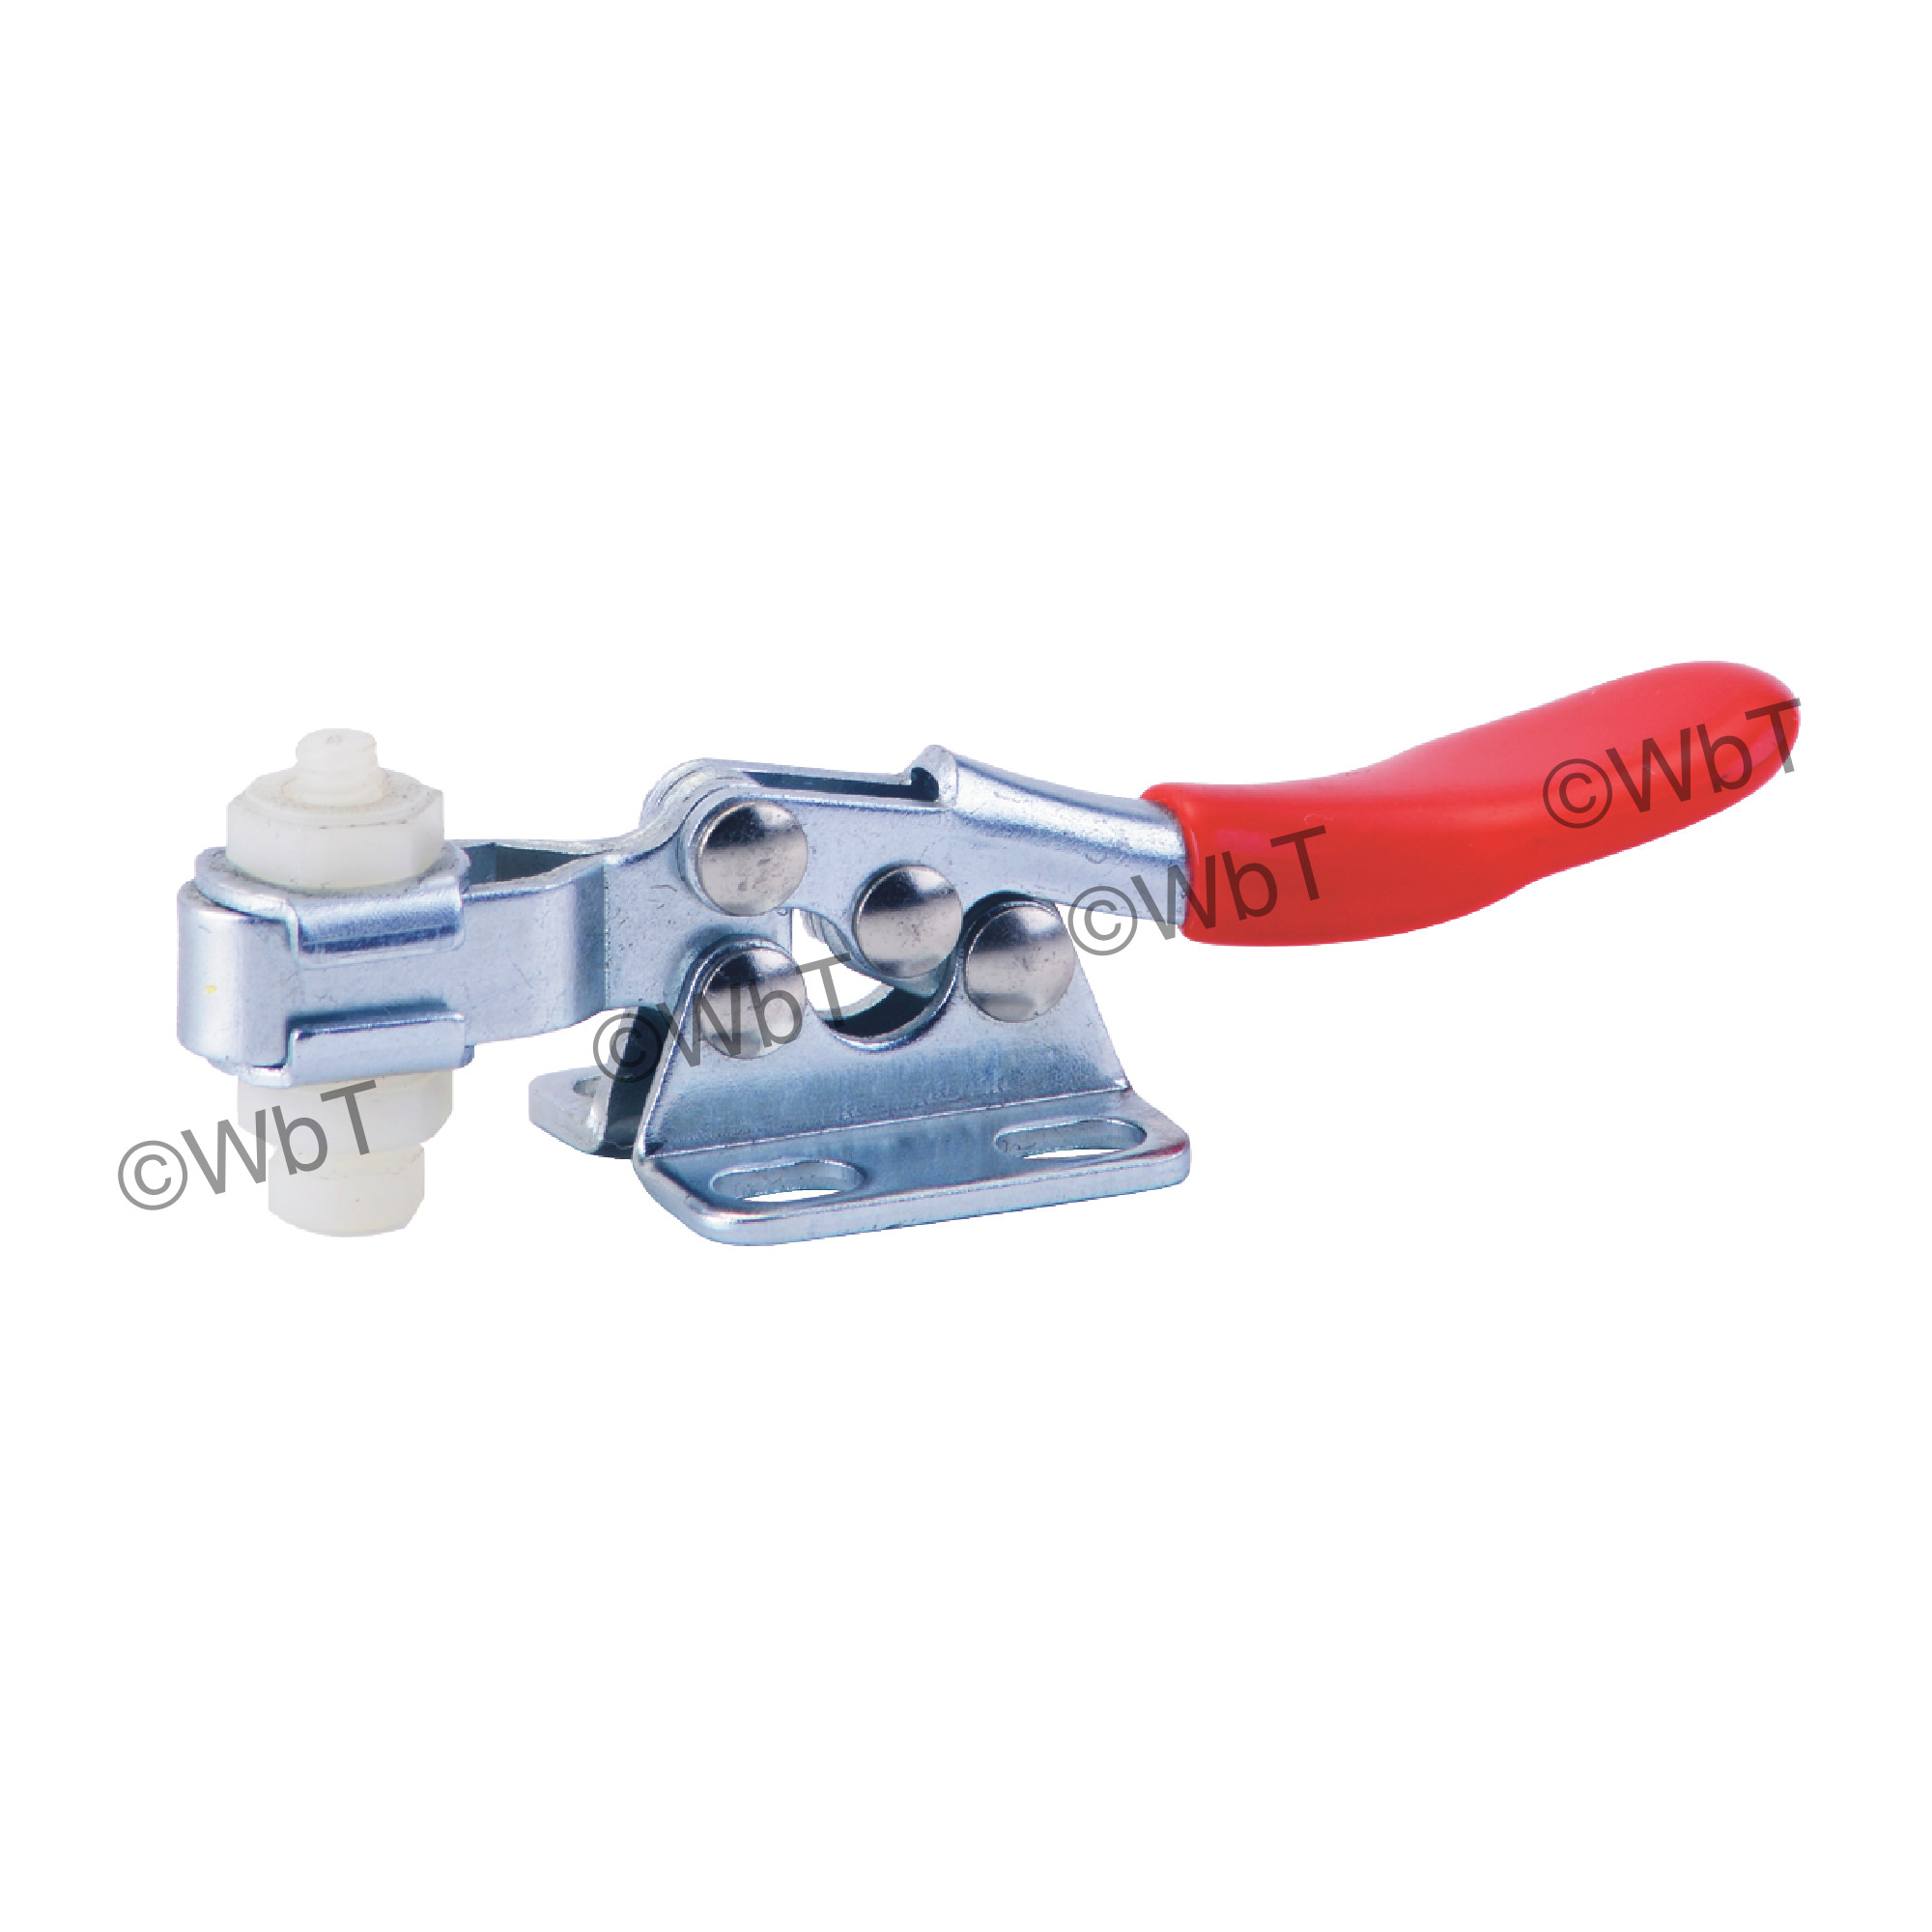 Horizontal Hold Down Action Toggle Clamp